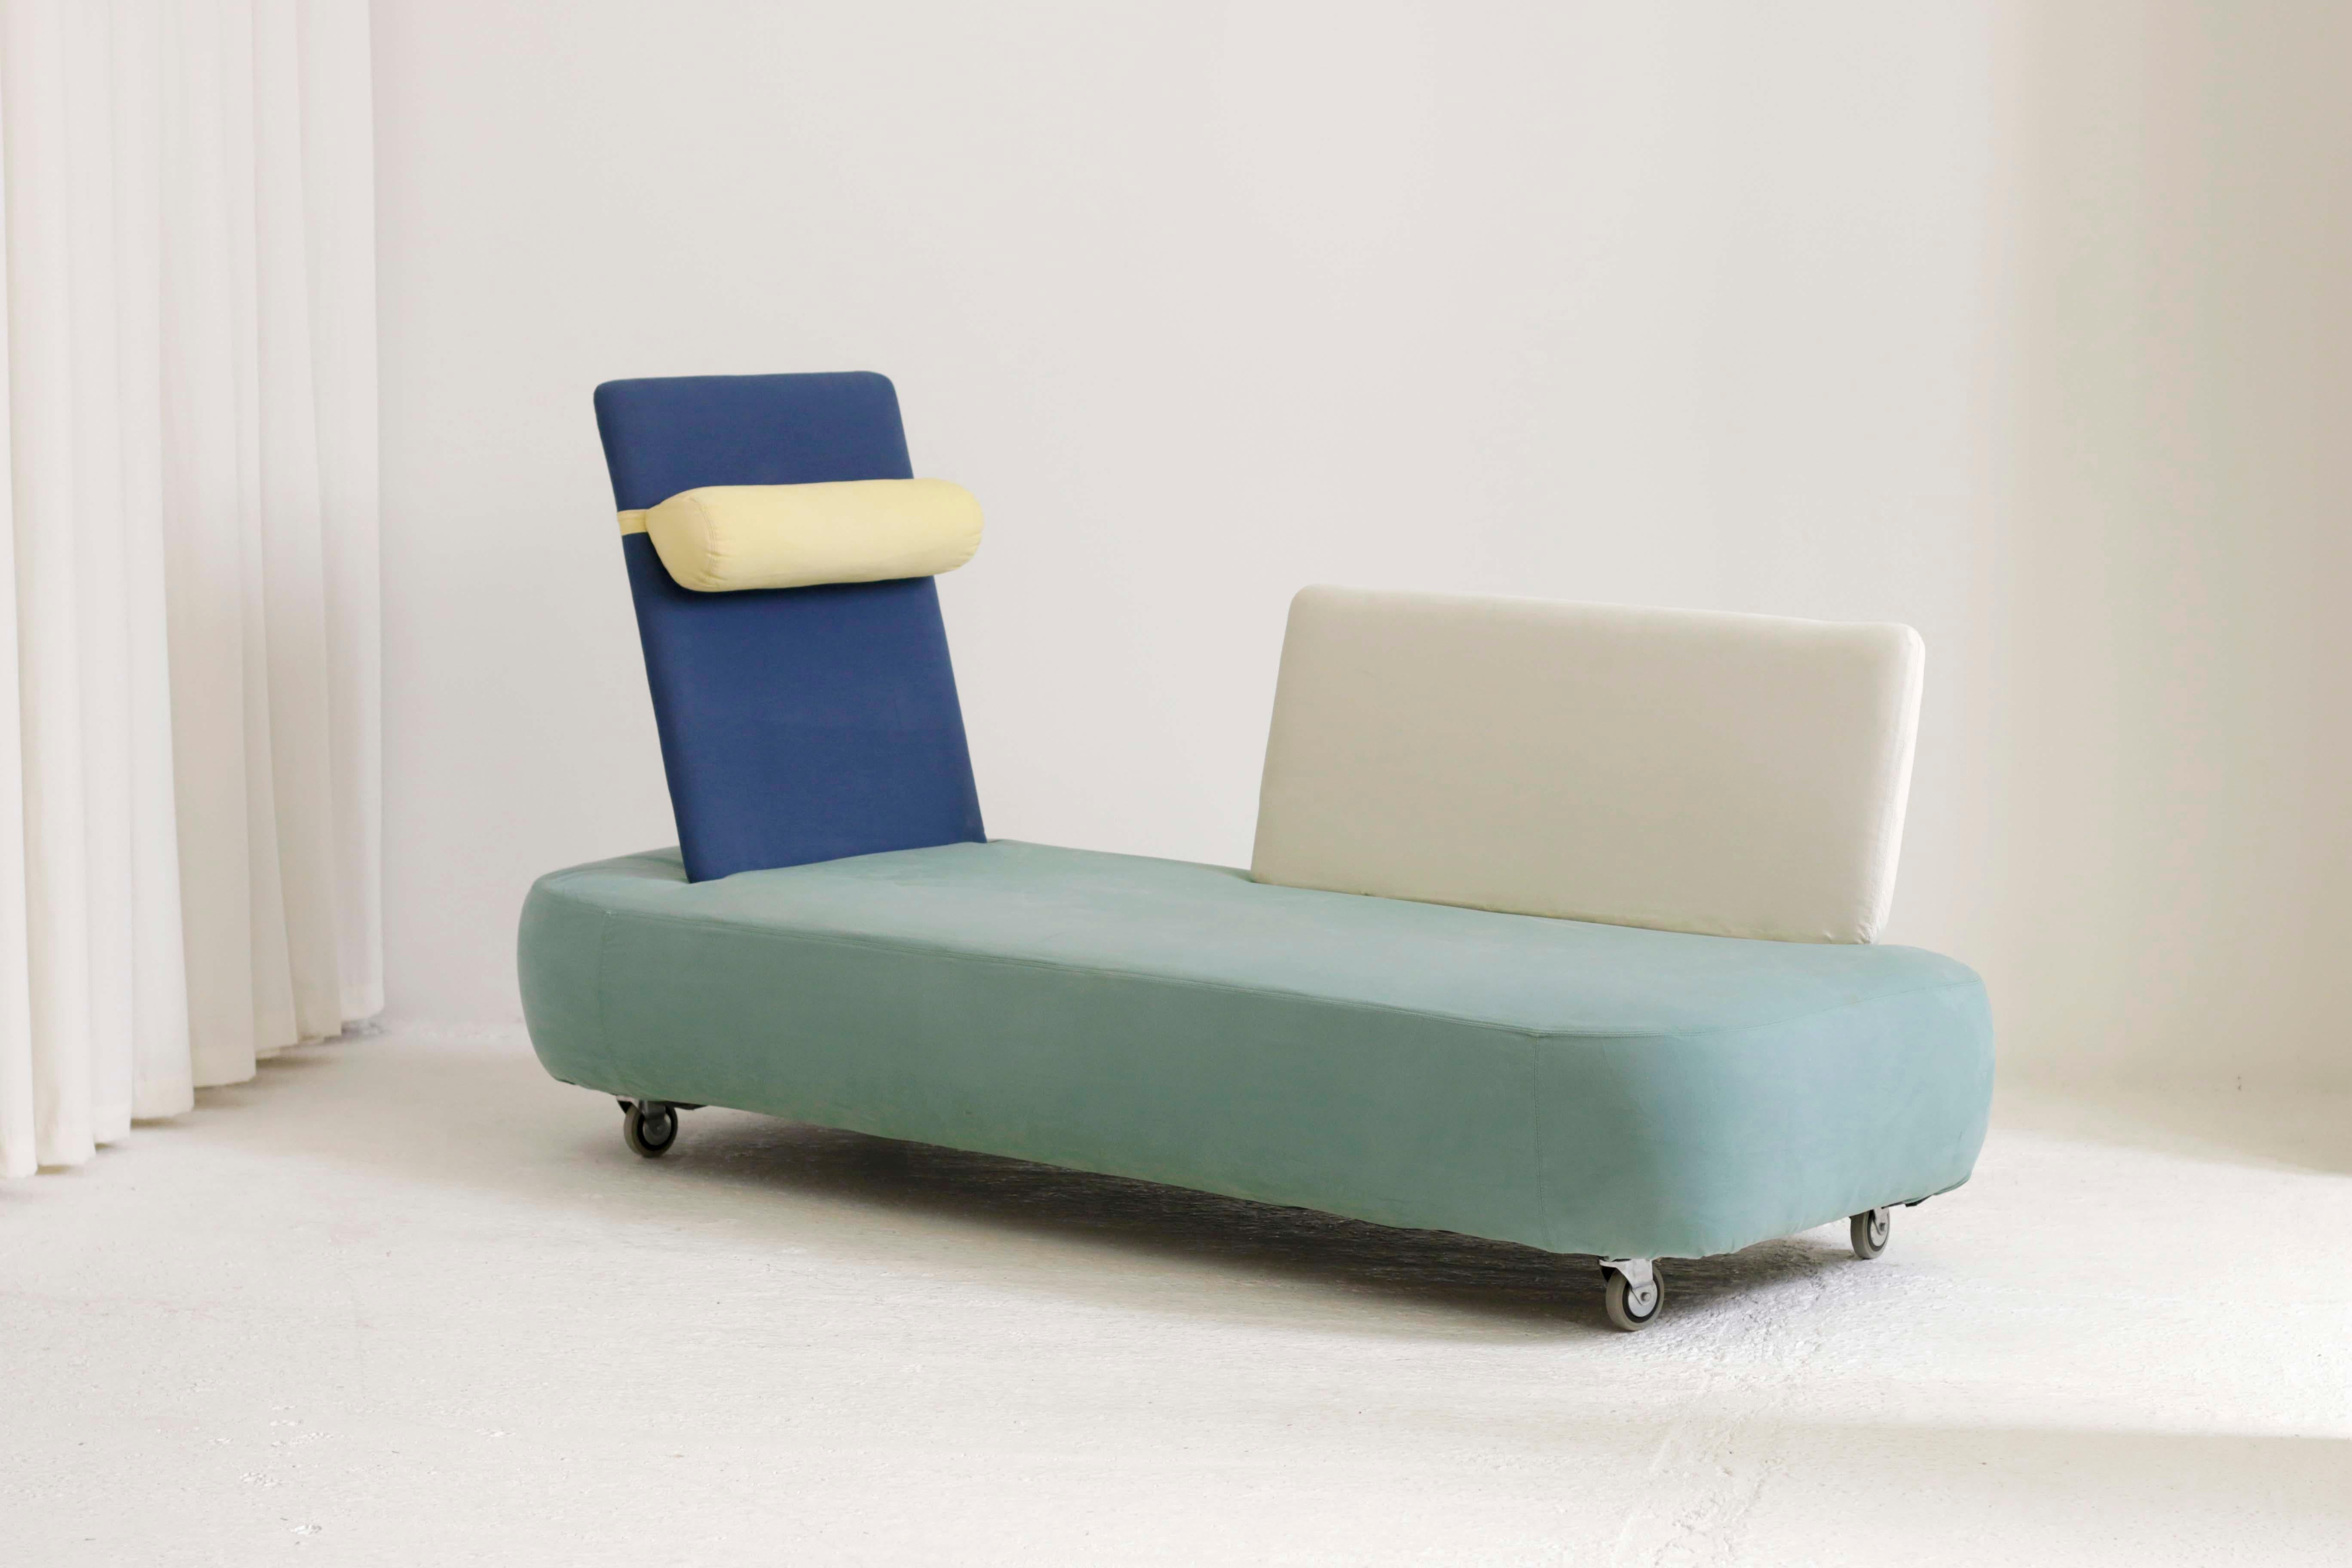 Junior 3 sofa by Antonio Citterio for Flexform circa 1990’s. A rare and unusual chaise in a typically playful postmodern 90’s style. Featuring an adjustable backrest, self locking castor feet and removable covers. The condition is very good, there